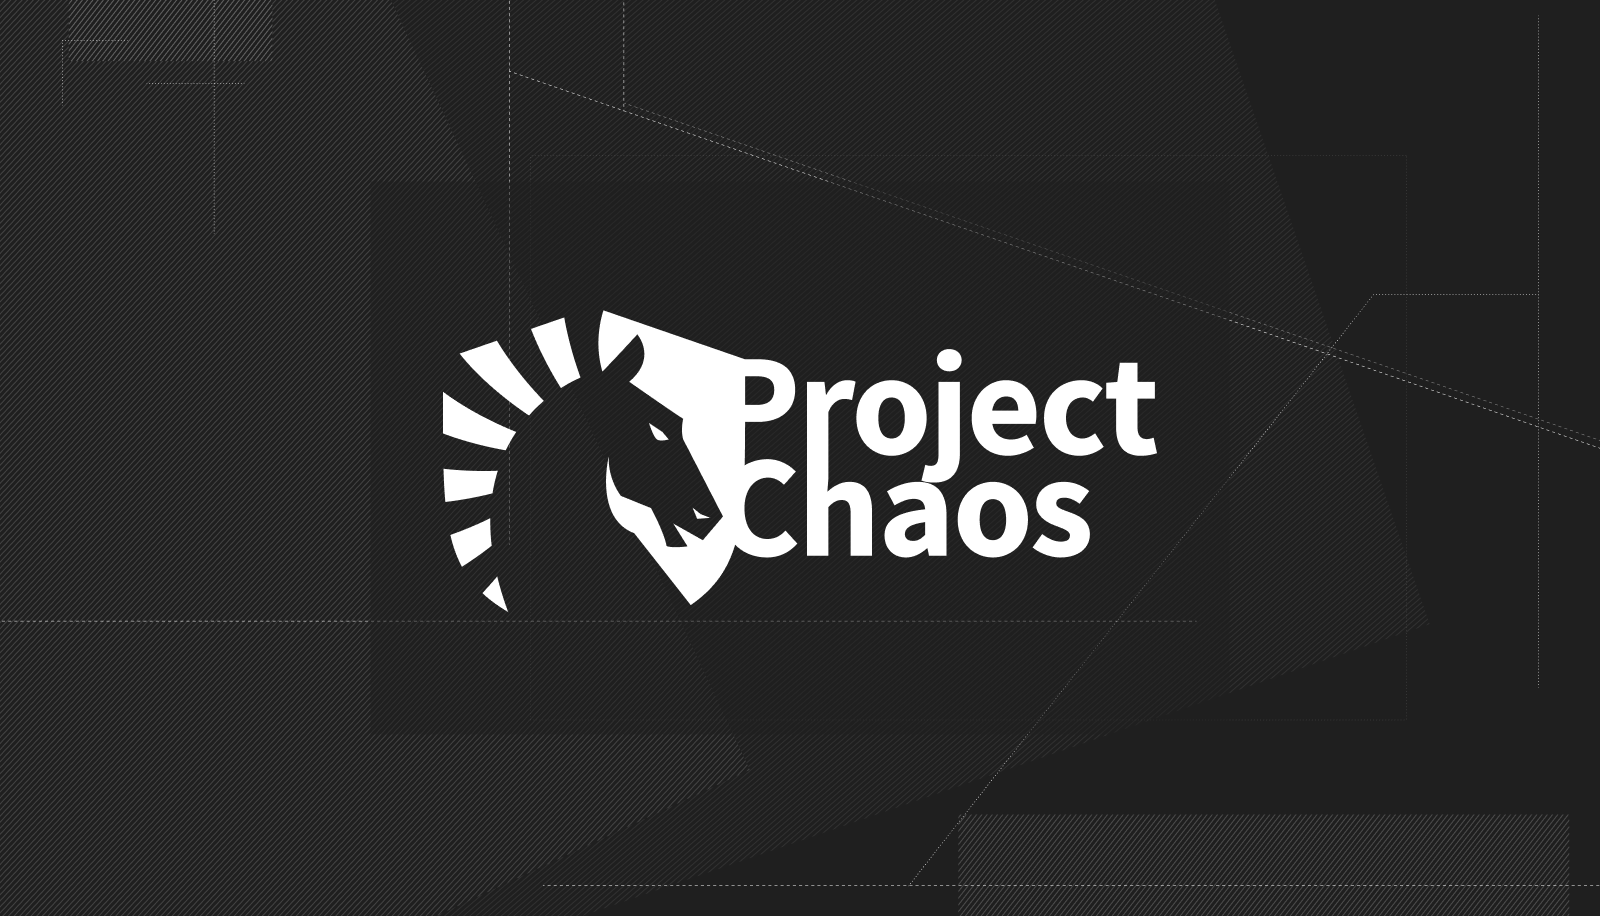 The visualization for Project Chaos, including the Team Liquid logo overlapping the project's title.